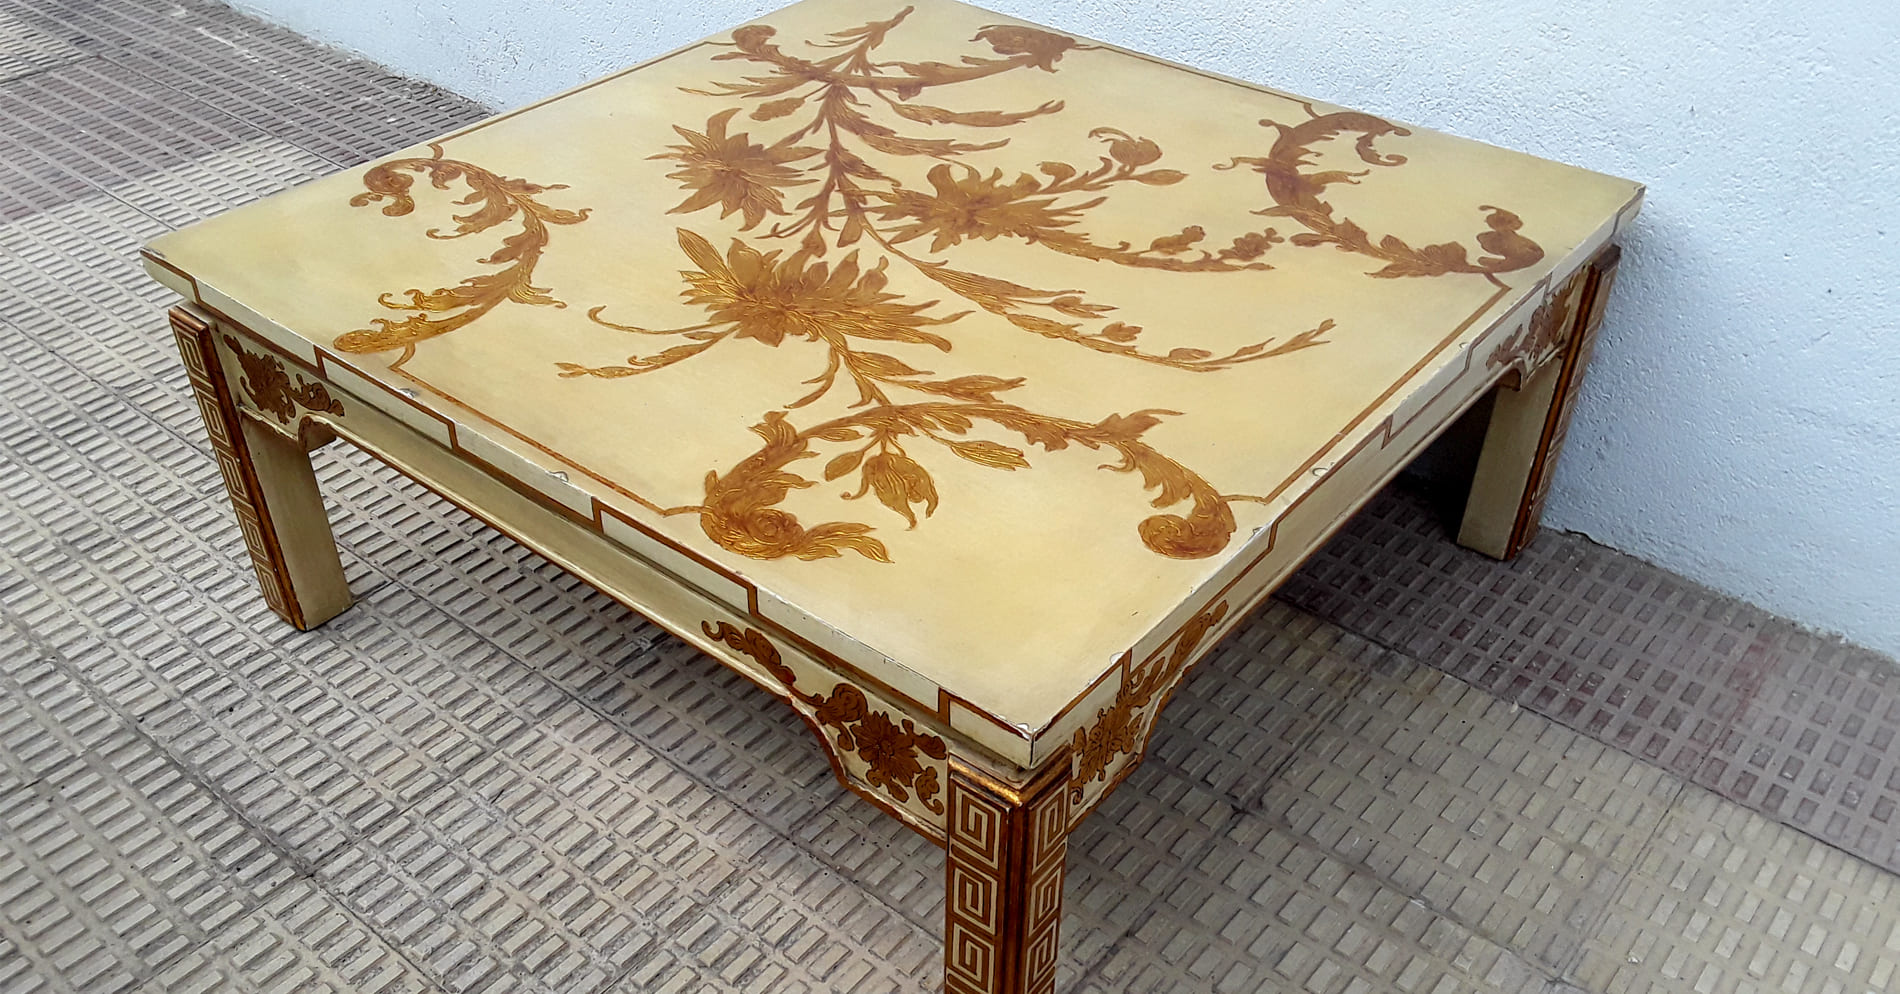 Cream lacquered coffee table with golden floral motifs